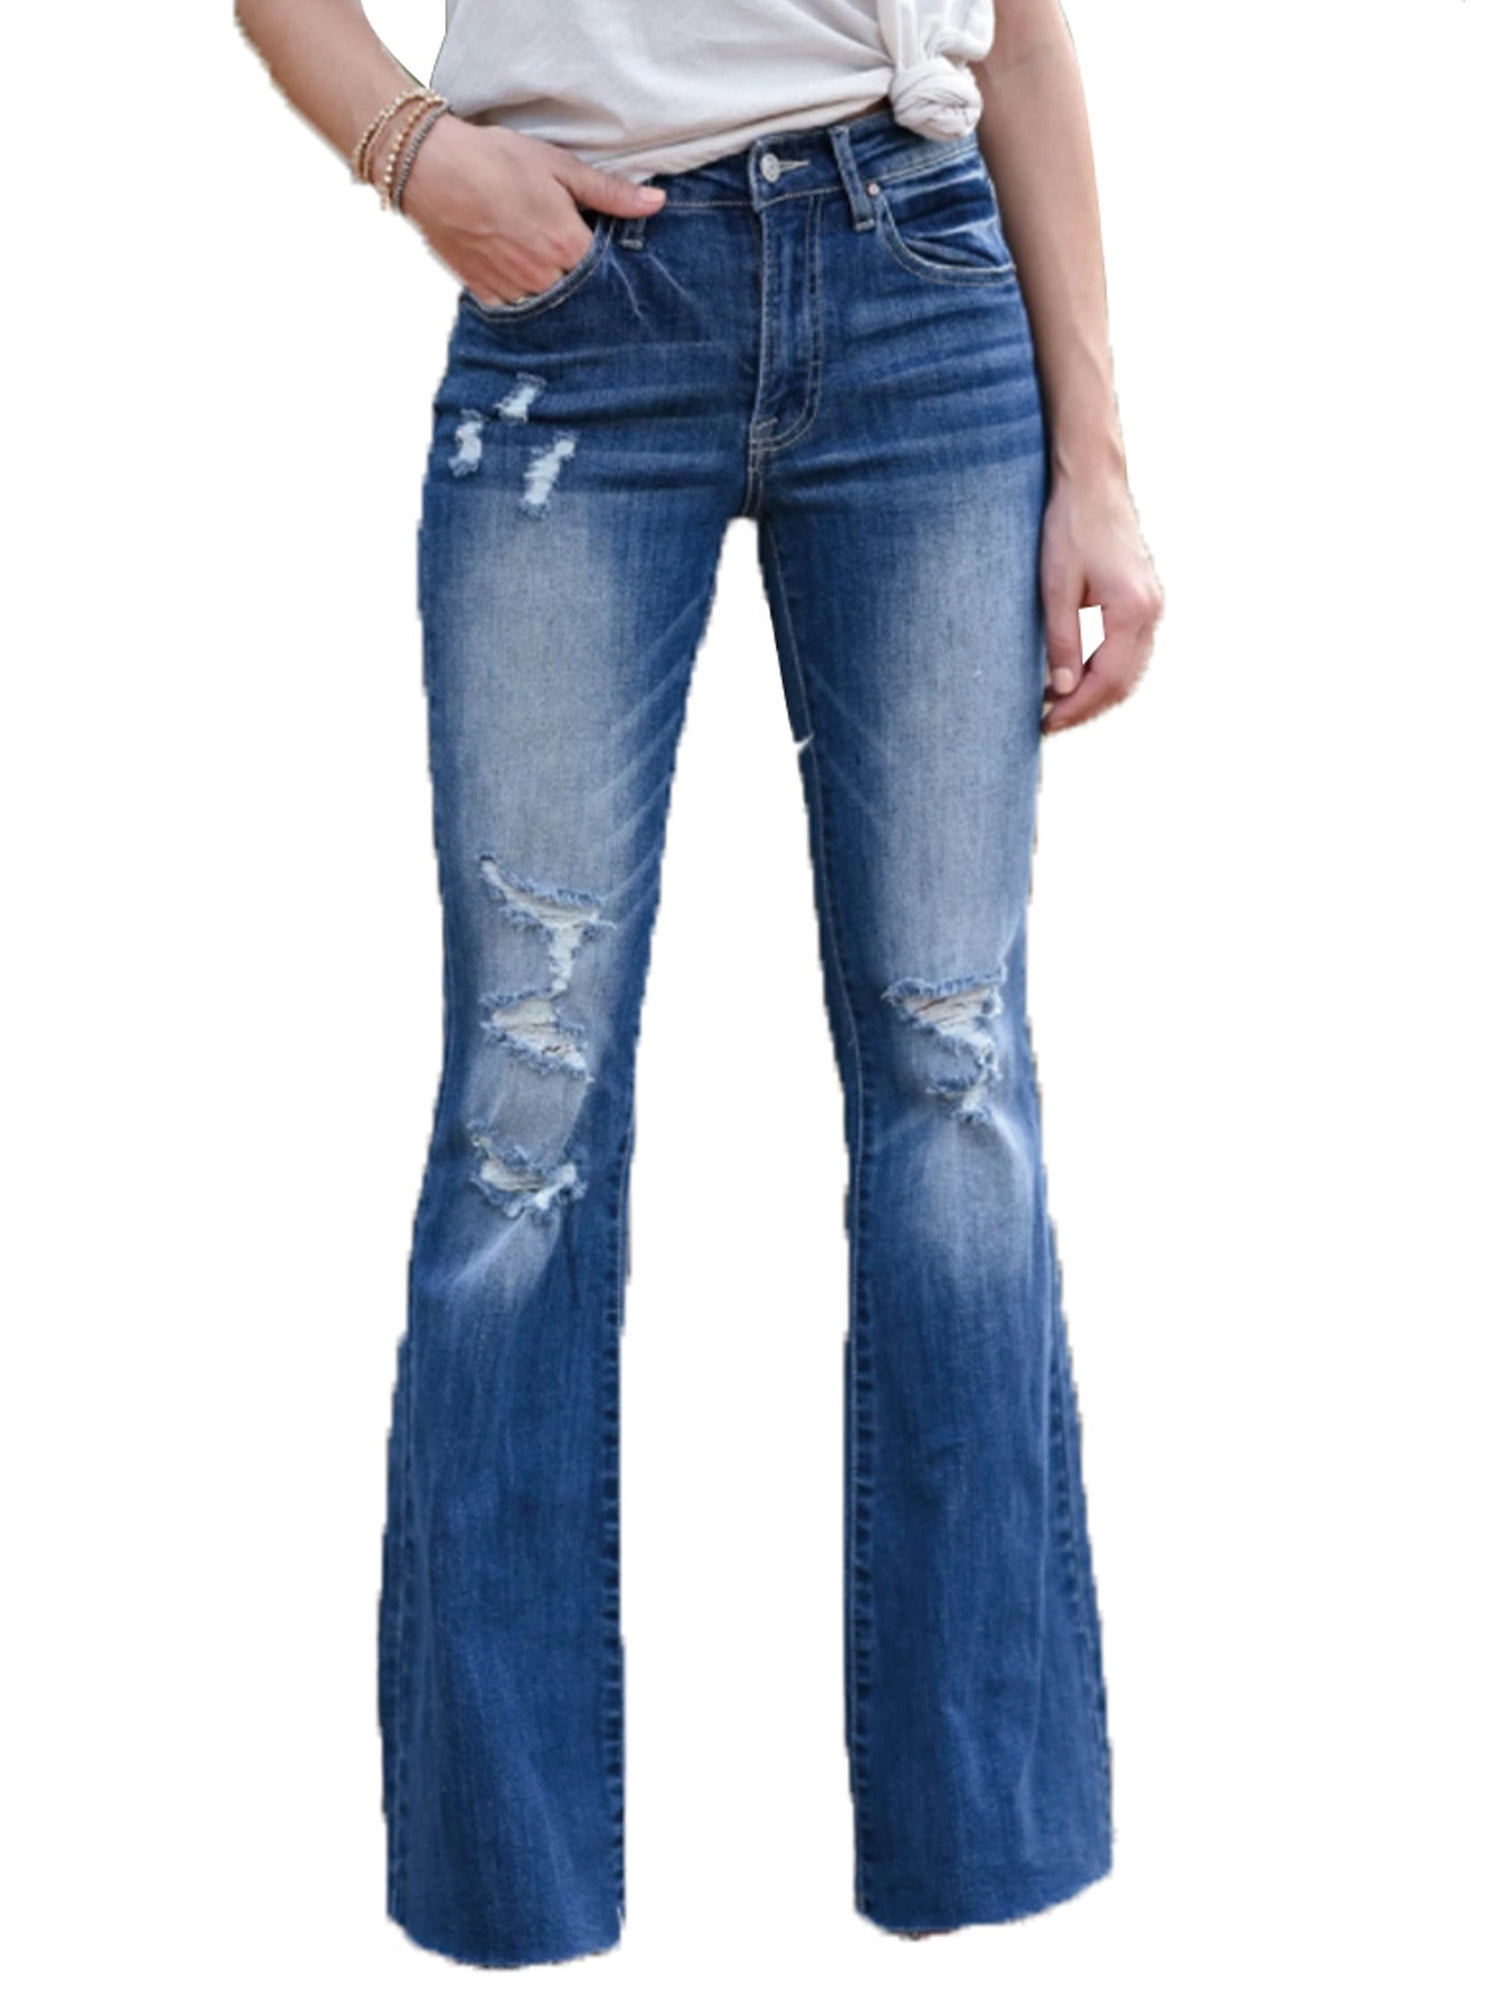 Womens Skinny Ripped Flared Jeans Ladies Bootcut Stretch Denim Pants Trousers